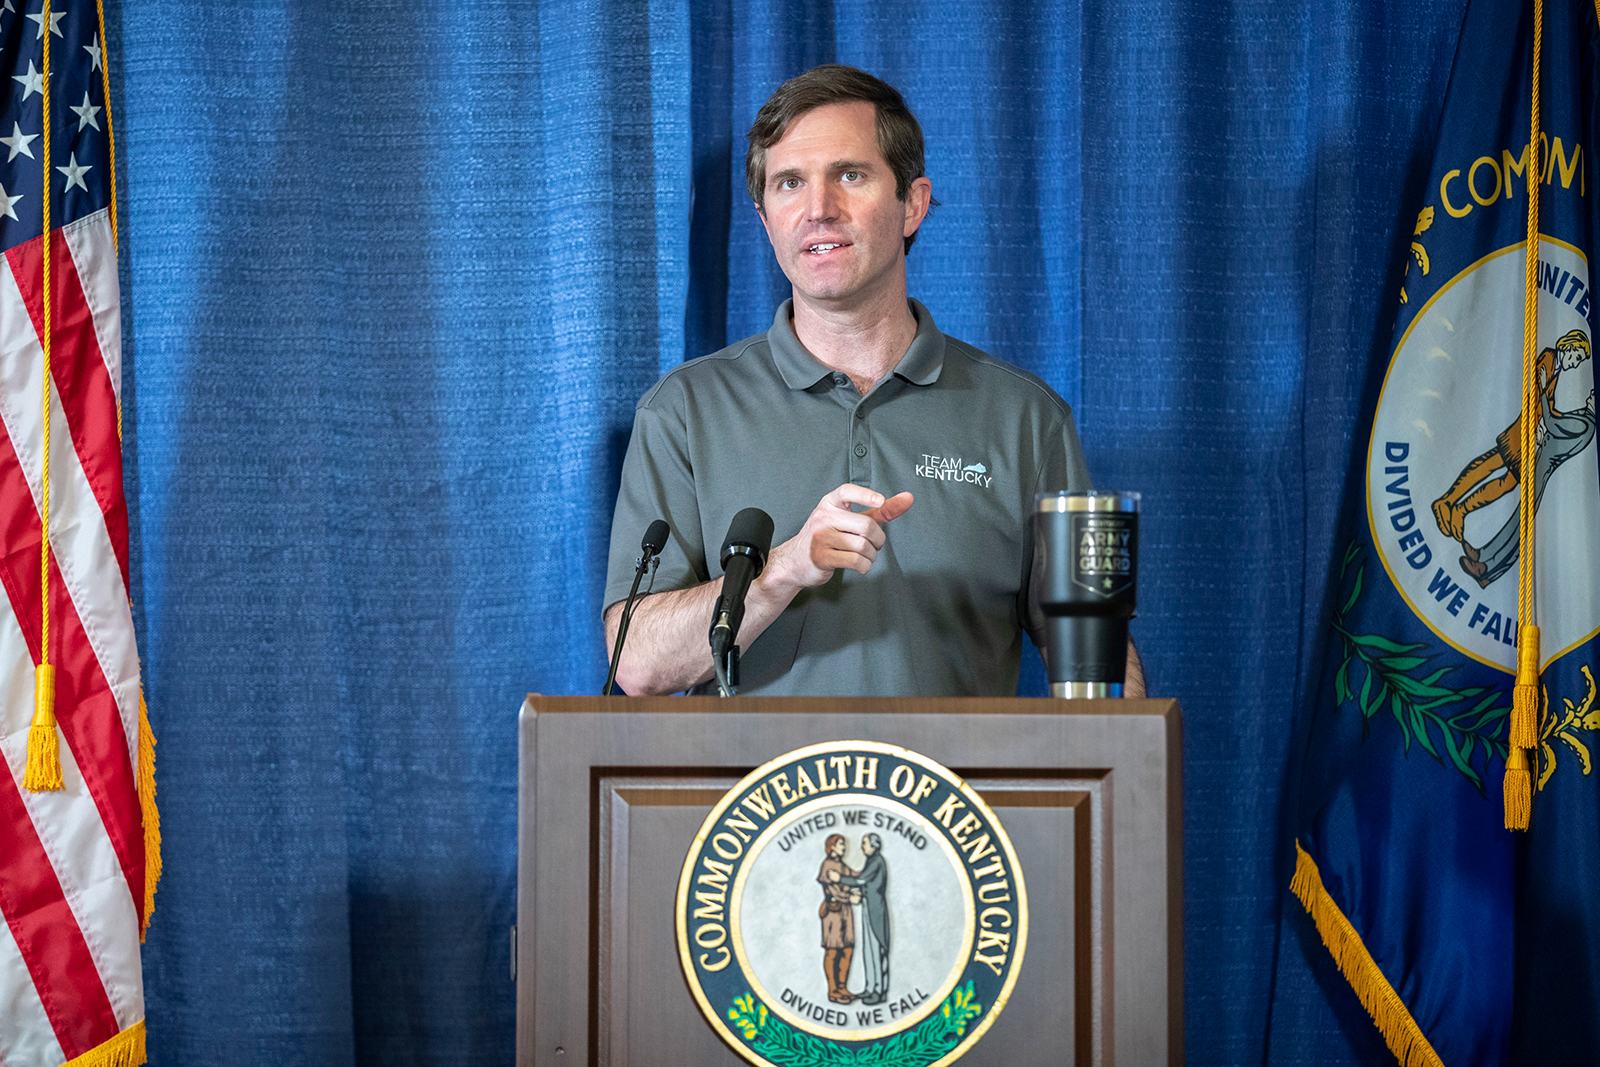 Gov. Andy Beshear speaks during a news conference at the state's Emergency Operations Center at the Boone National Guard Center in Frankfort, Kentucky, on May 3.